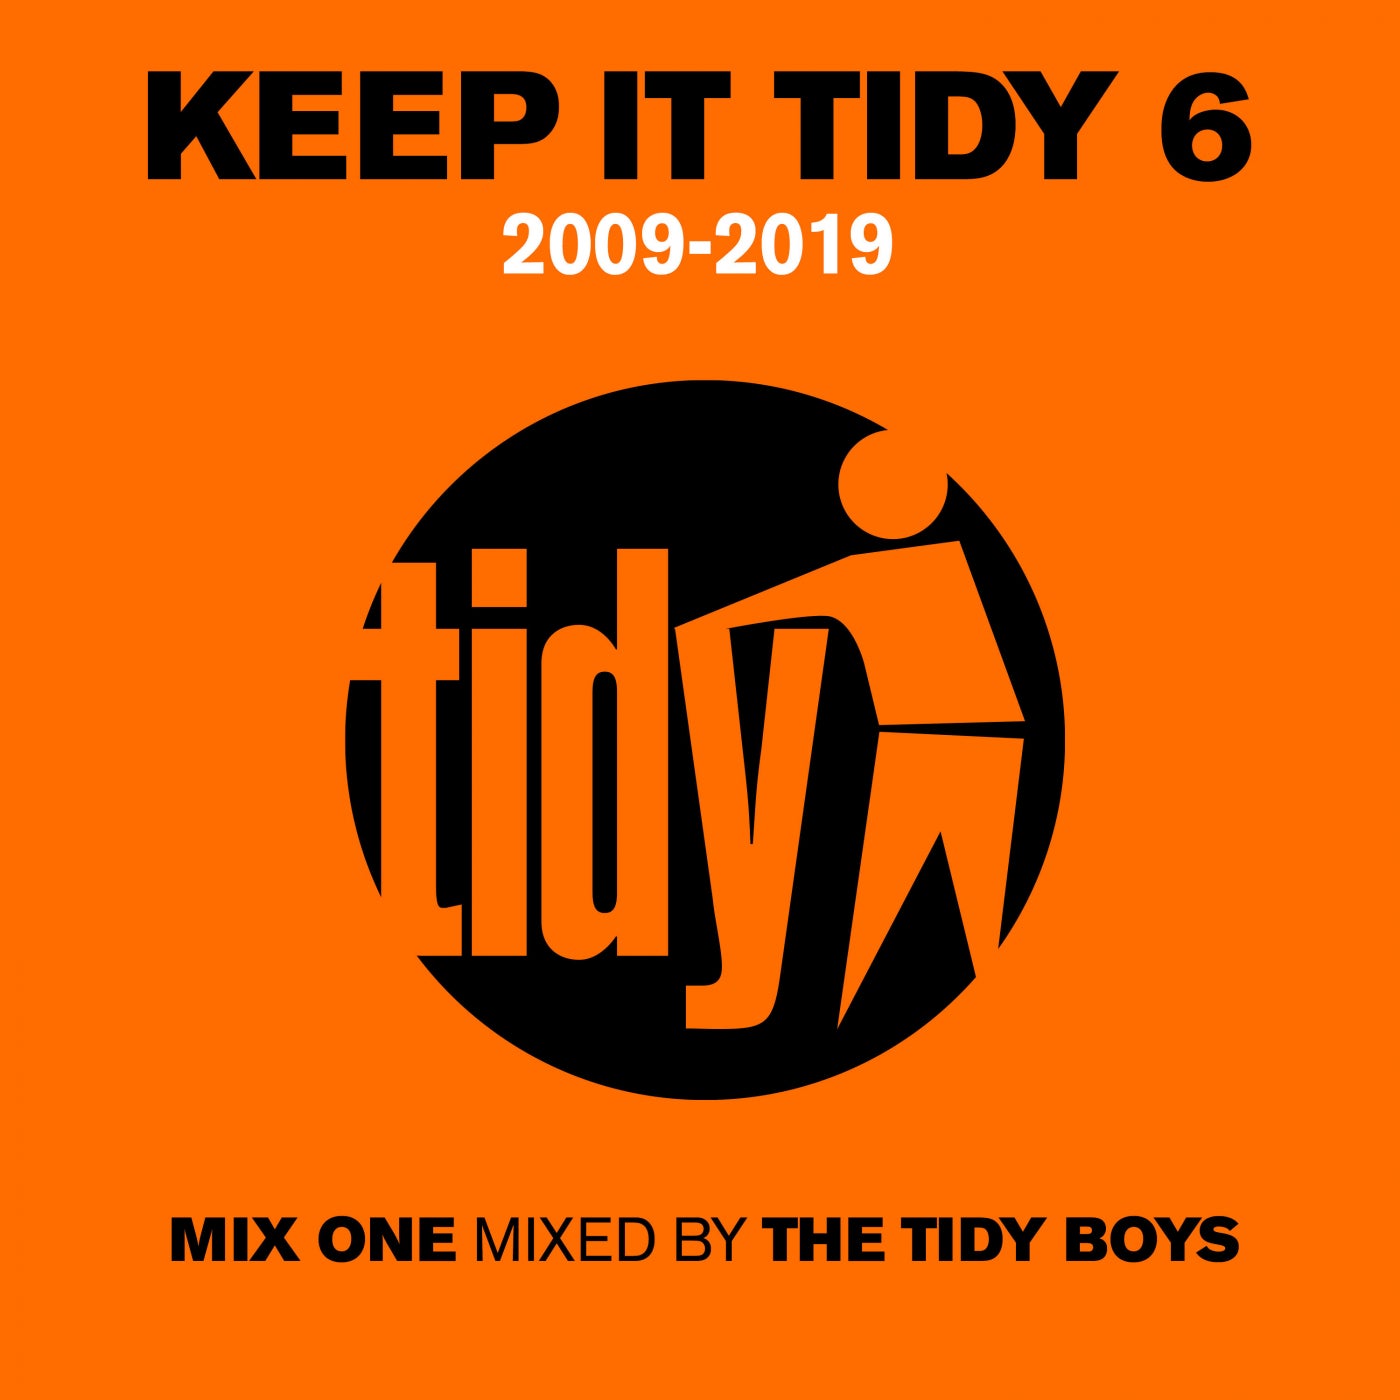 Keep It Tidy 6 - Mixed by The Tidy Boys